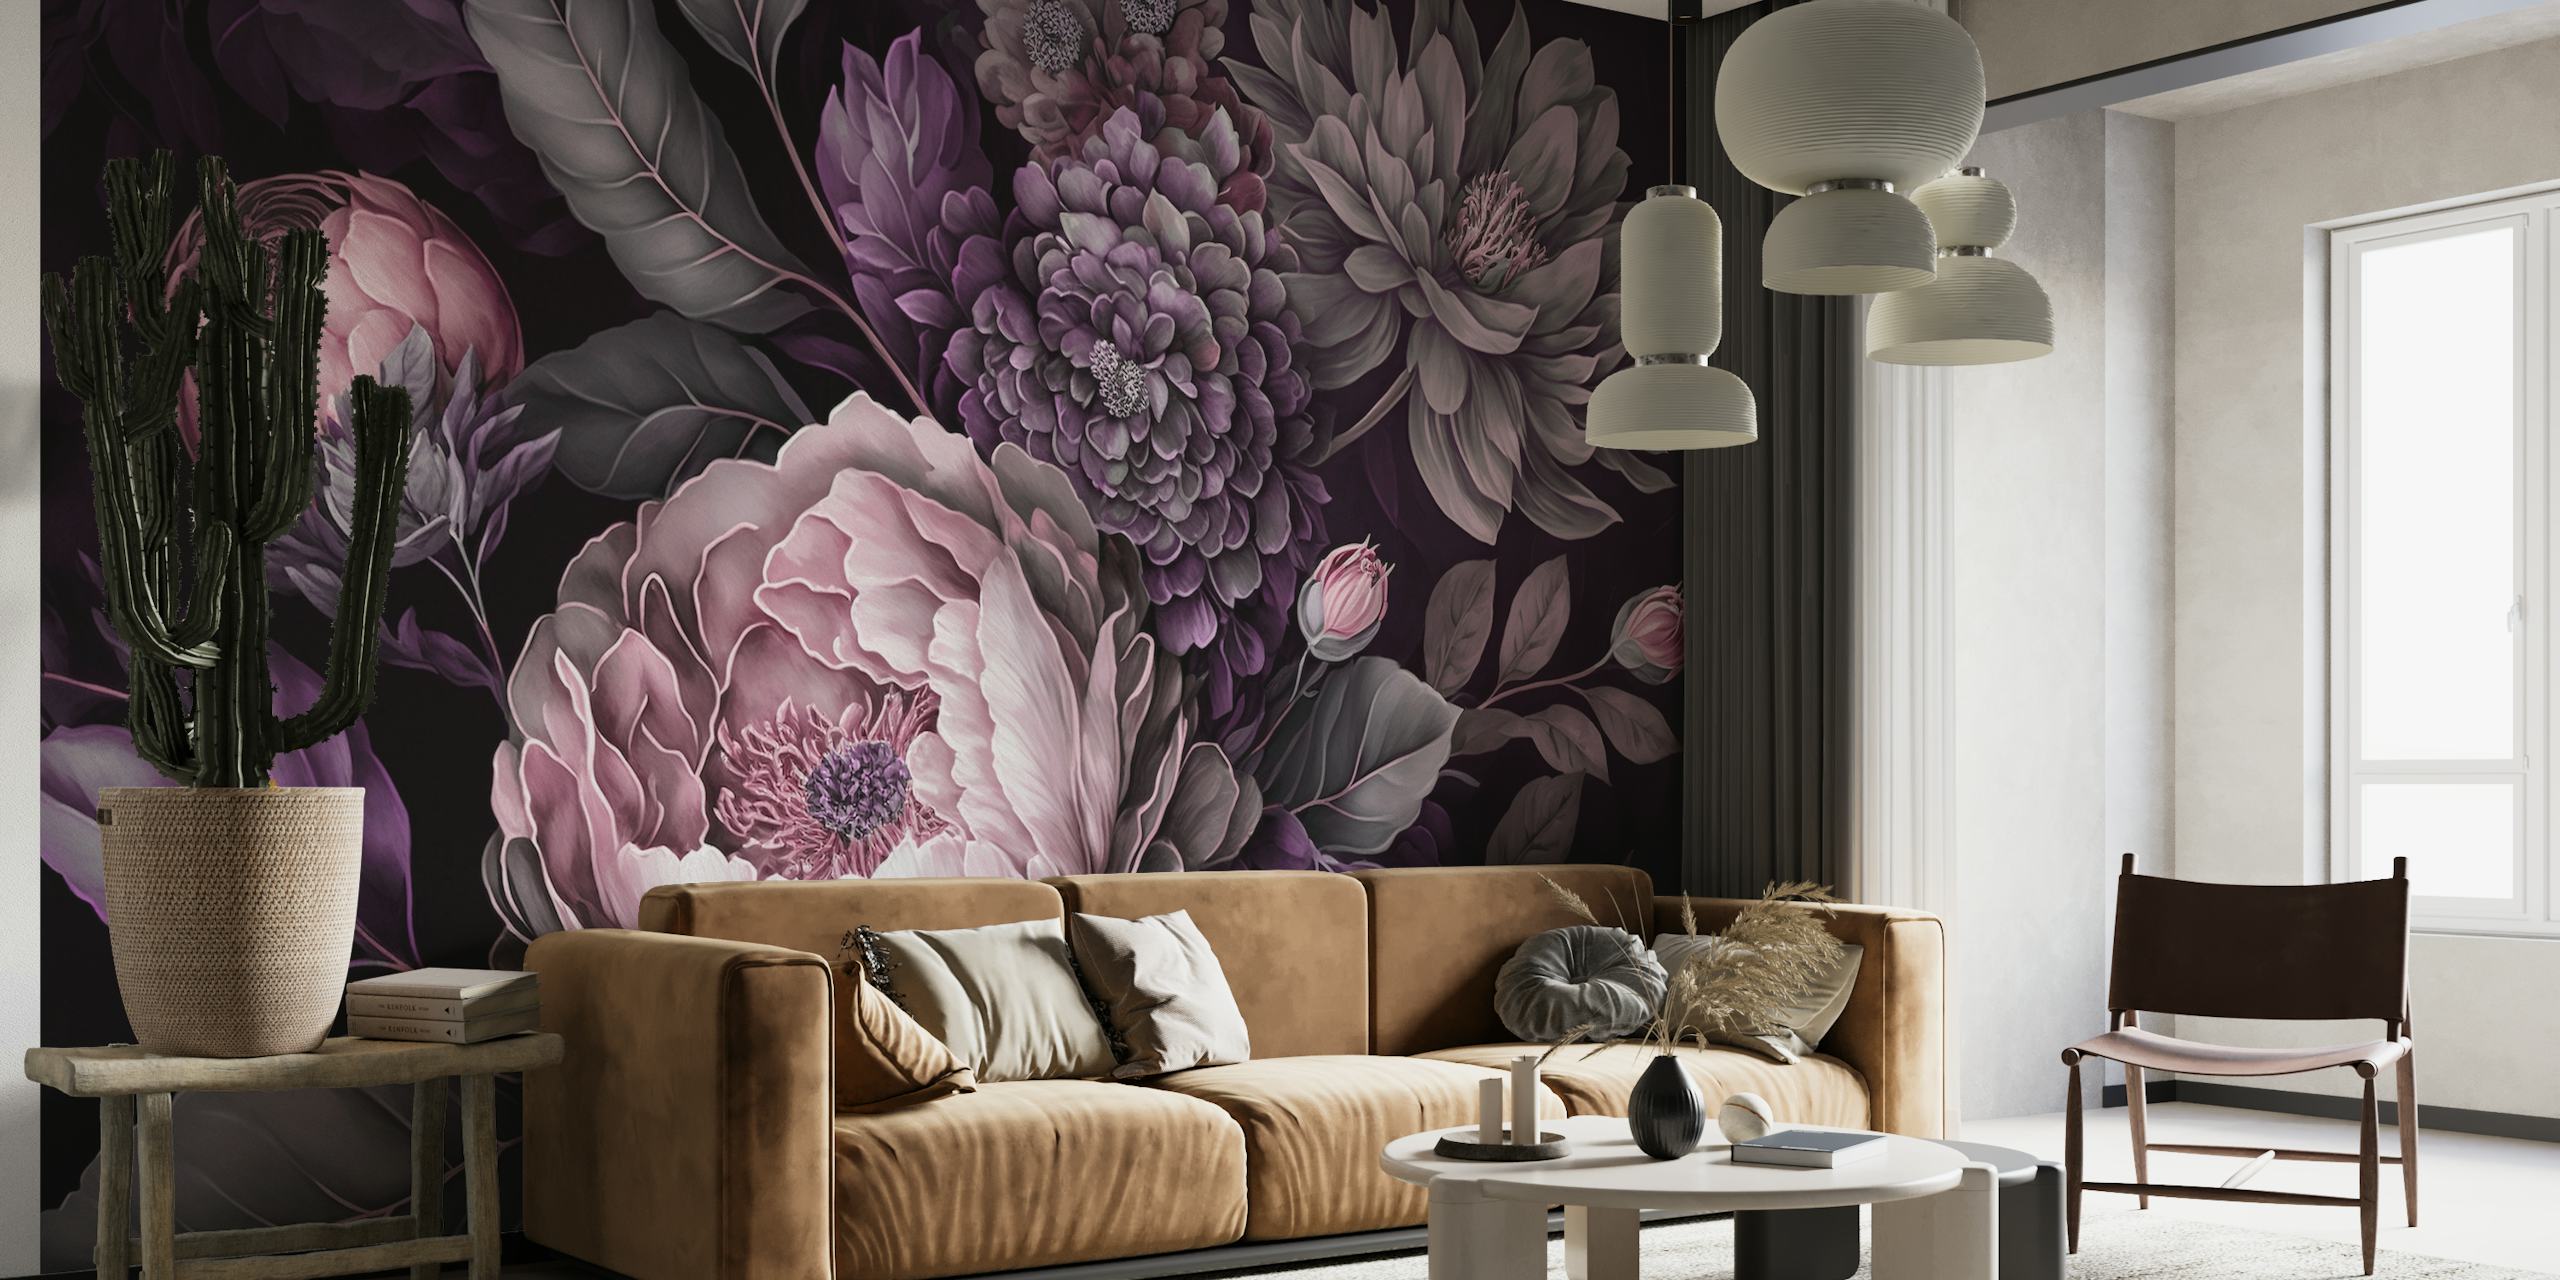 Luxurious pink baroque-styled large floral wall mural